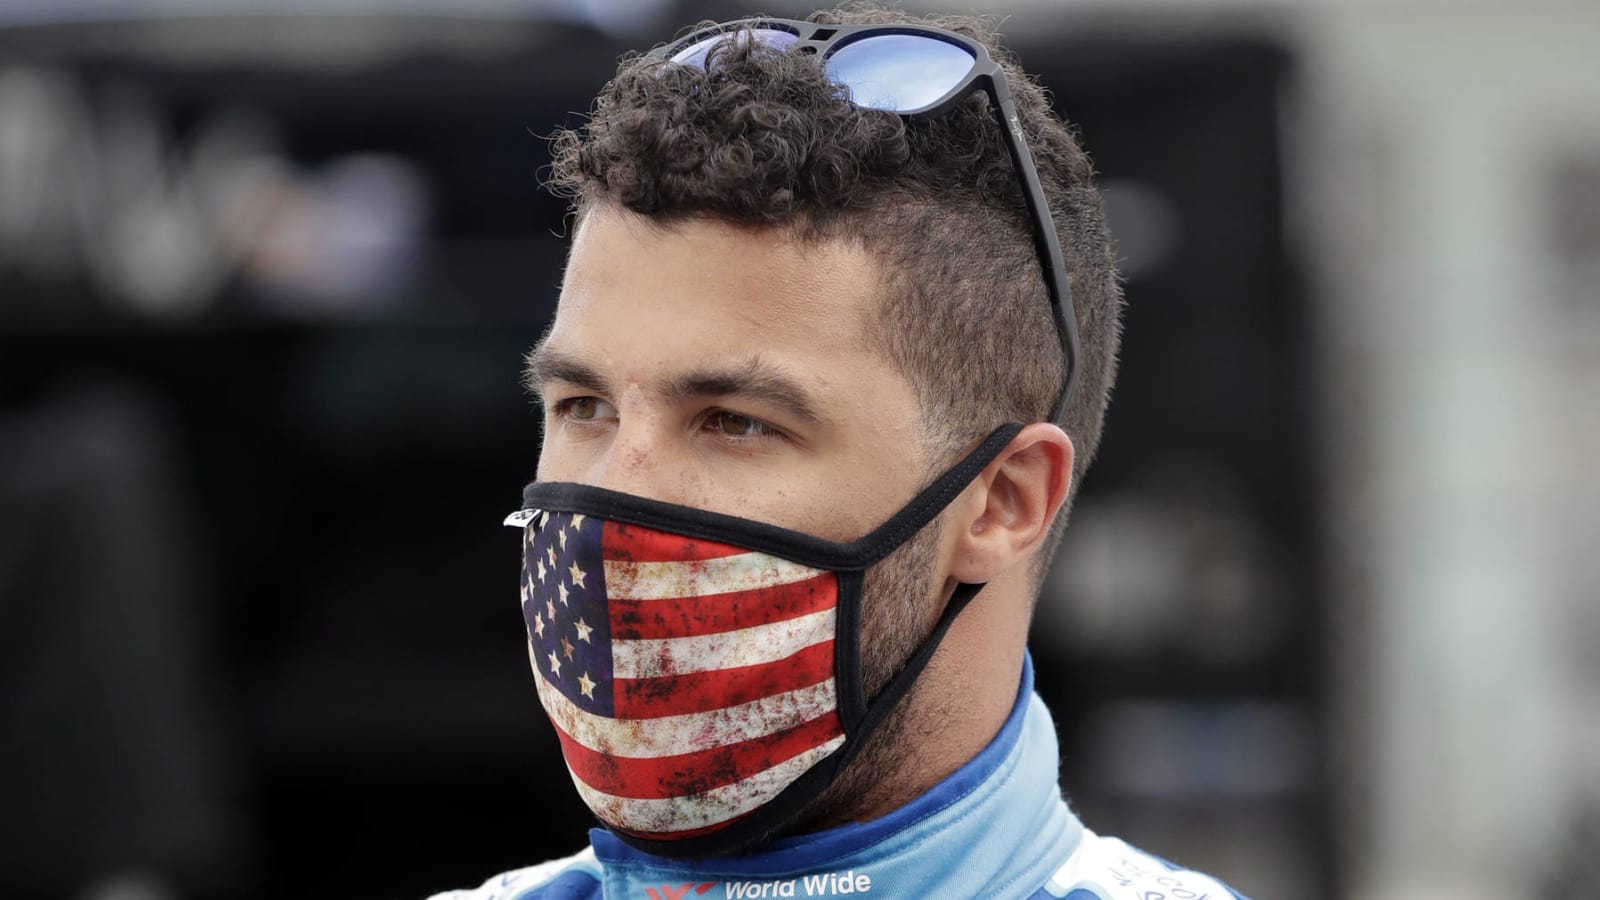 Photo of alleged noose found in Bubba Wallace's garage stall surfaces online